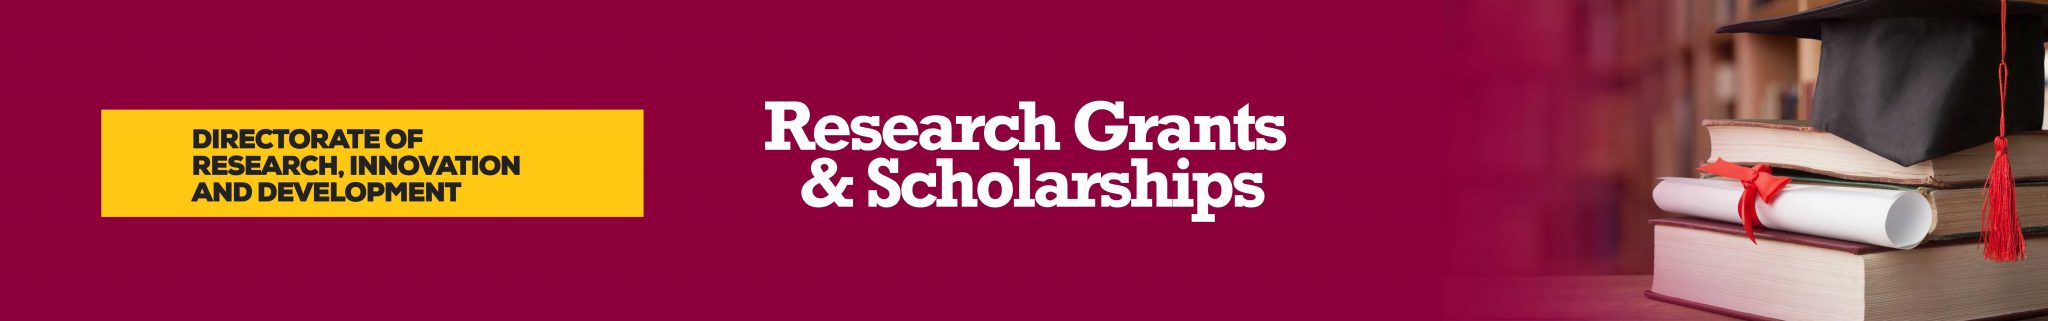 Research Grants And Schorlarships Aamusted 9655